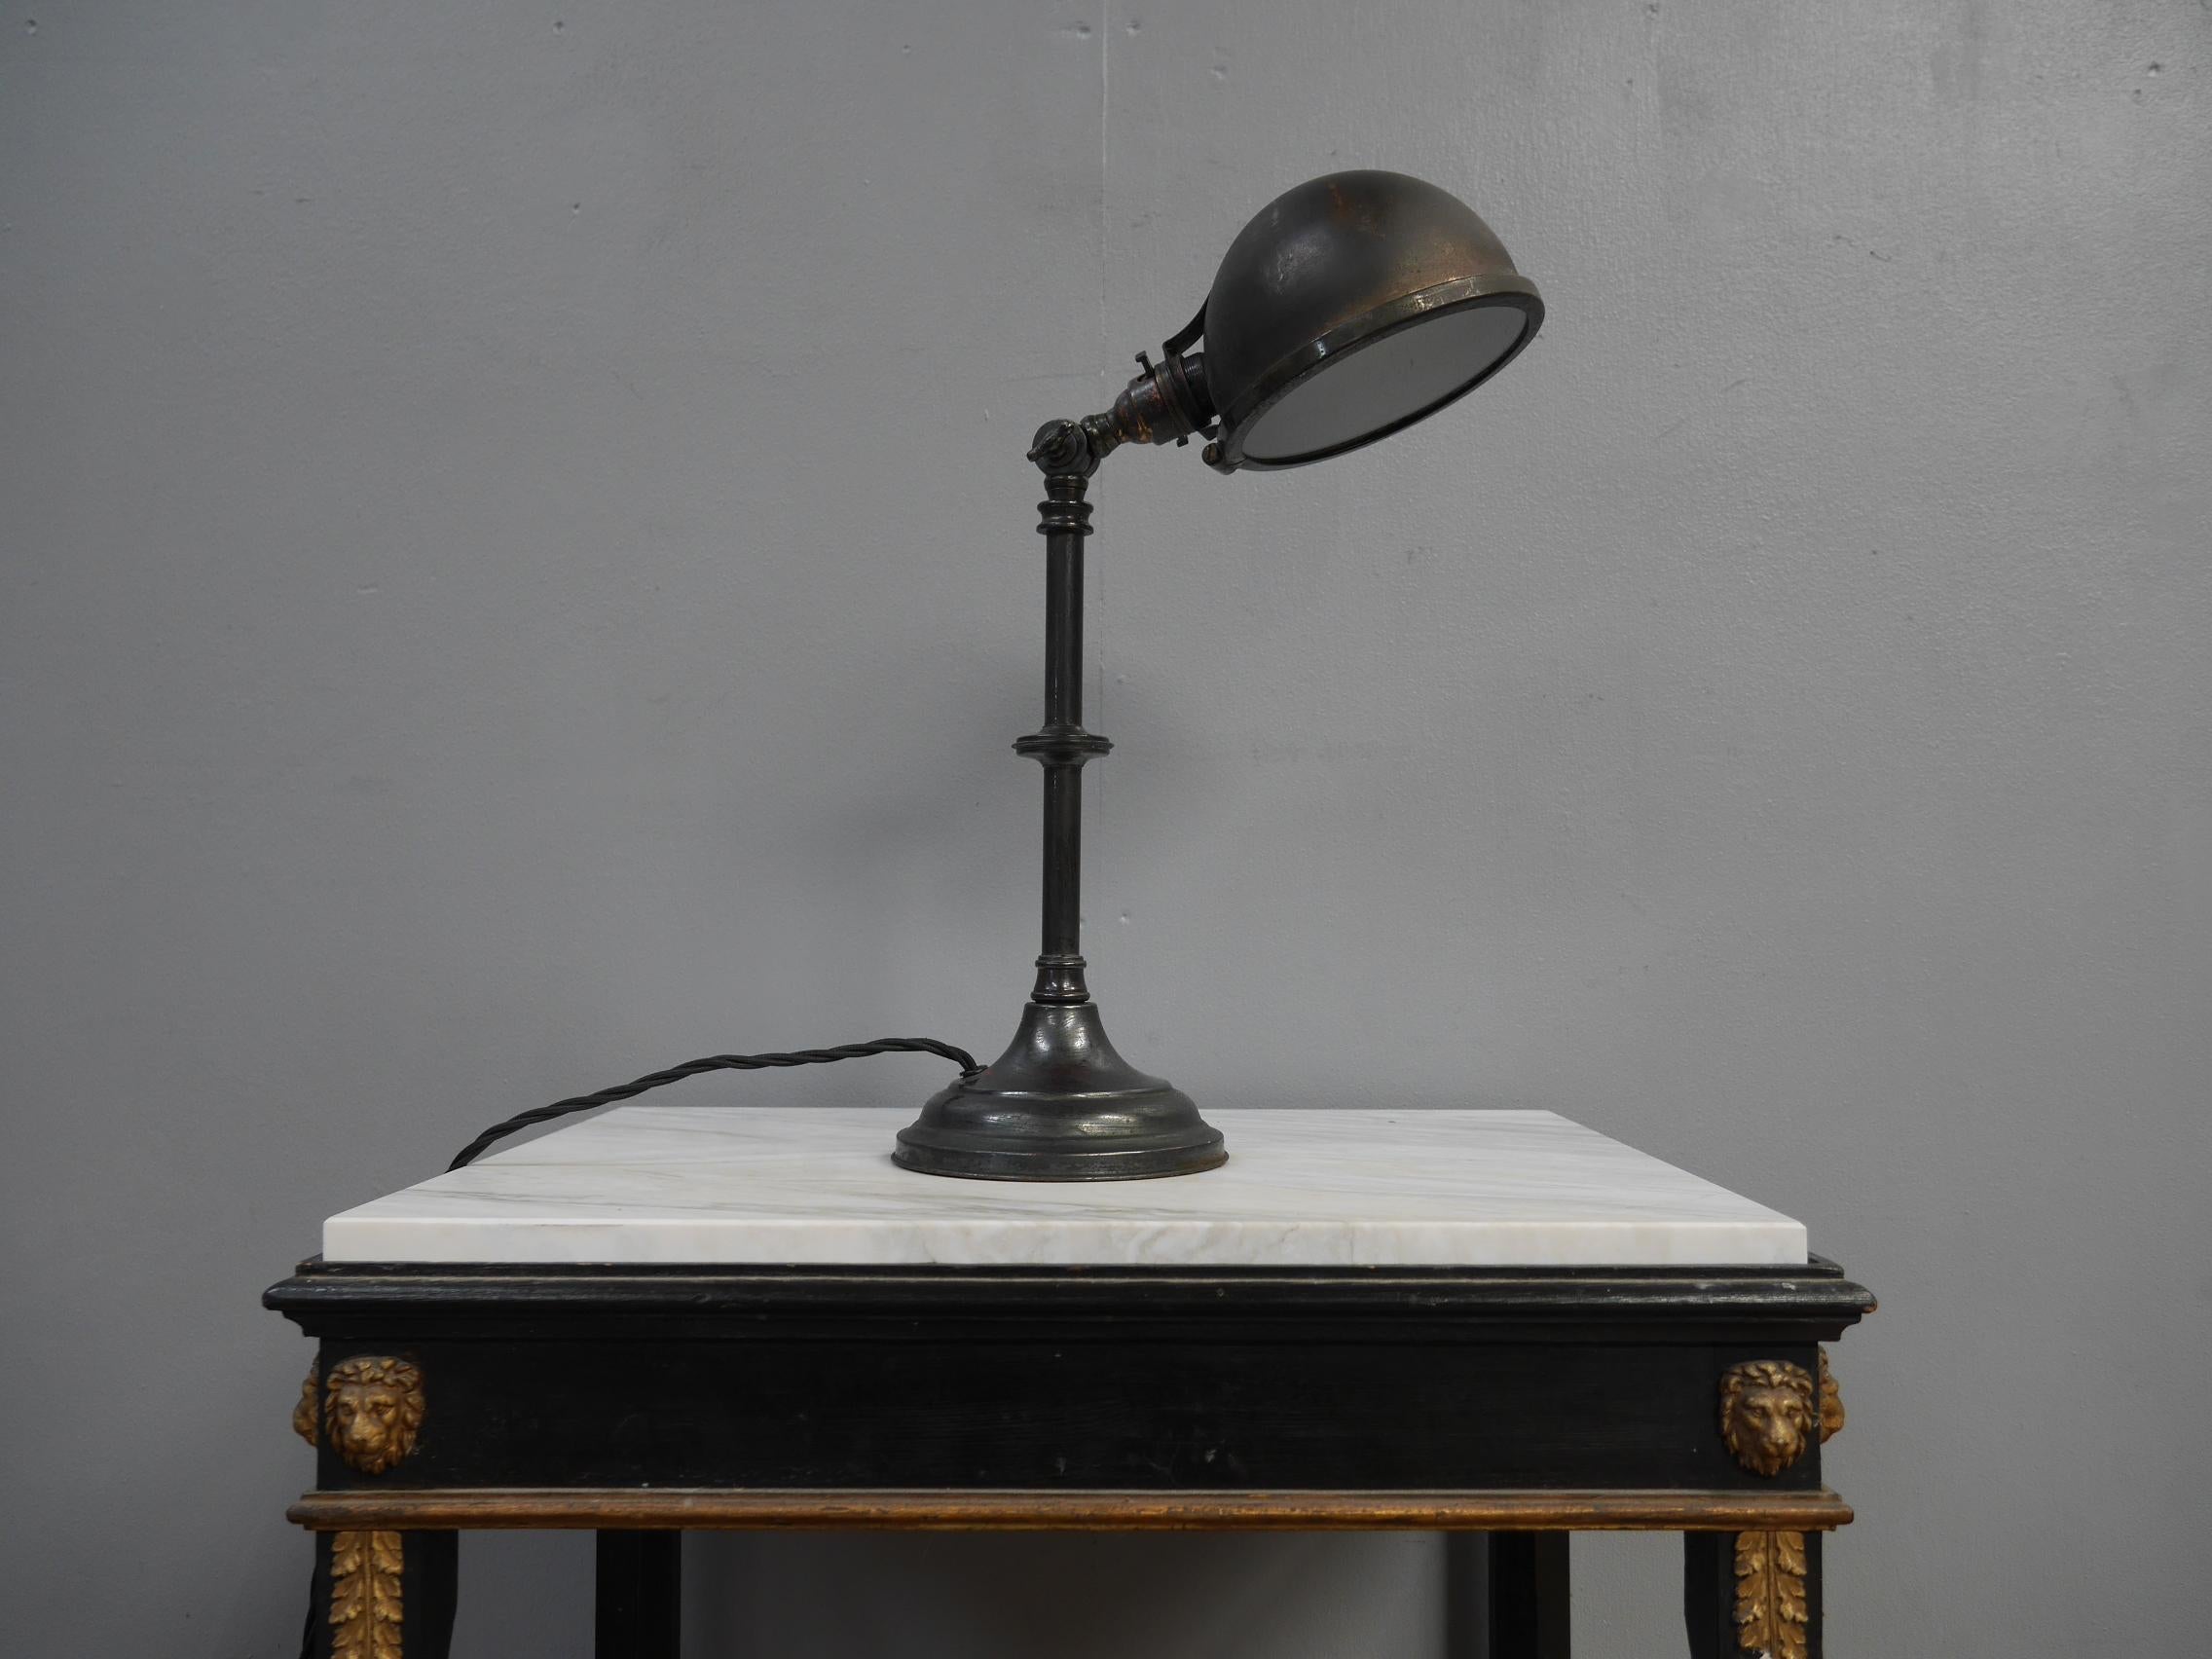 An early English industrial desk lamp.
A particularly good articulated desk lamp in dark nickel plated copper with an excellent patina. The base is weighted with cast iron & the underside of the riveted, spun copper shade has removable glazing.
An